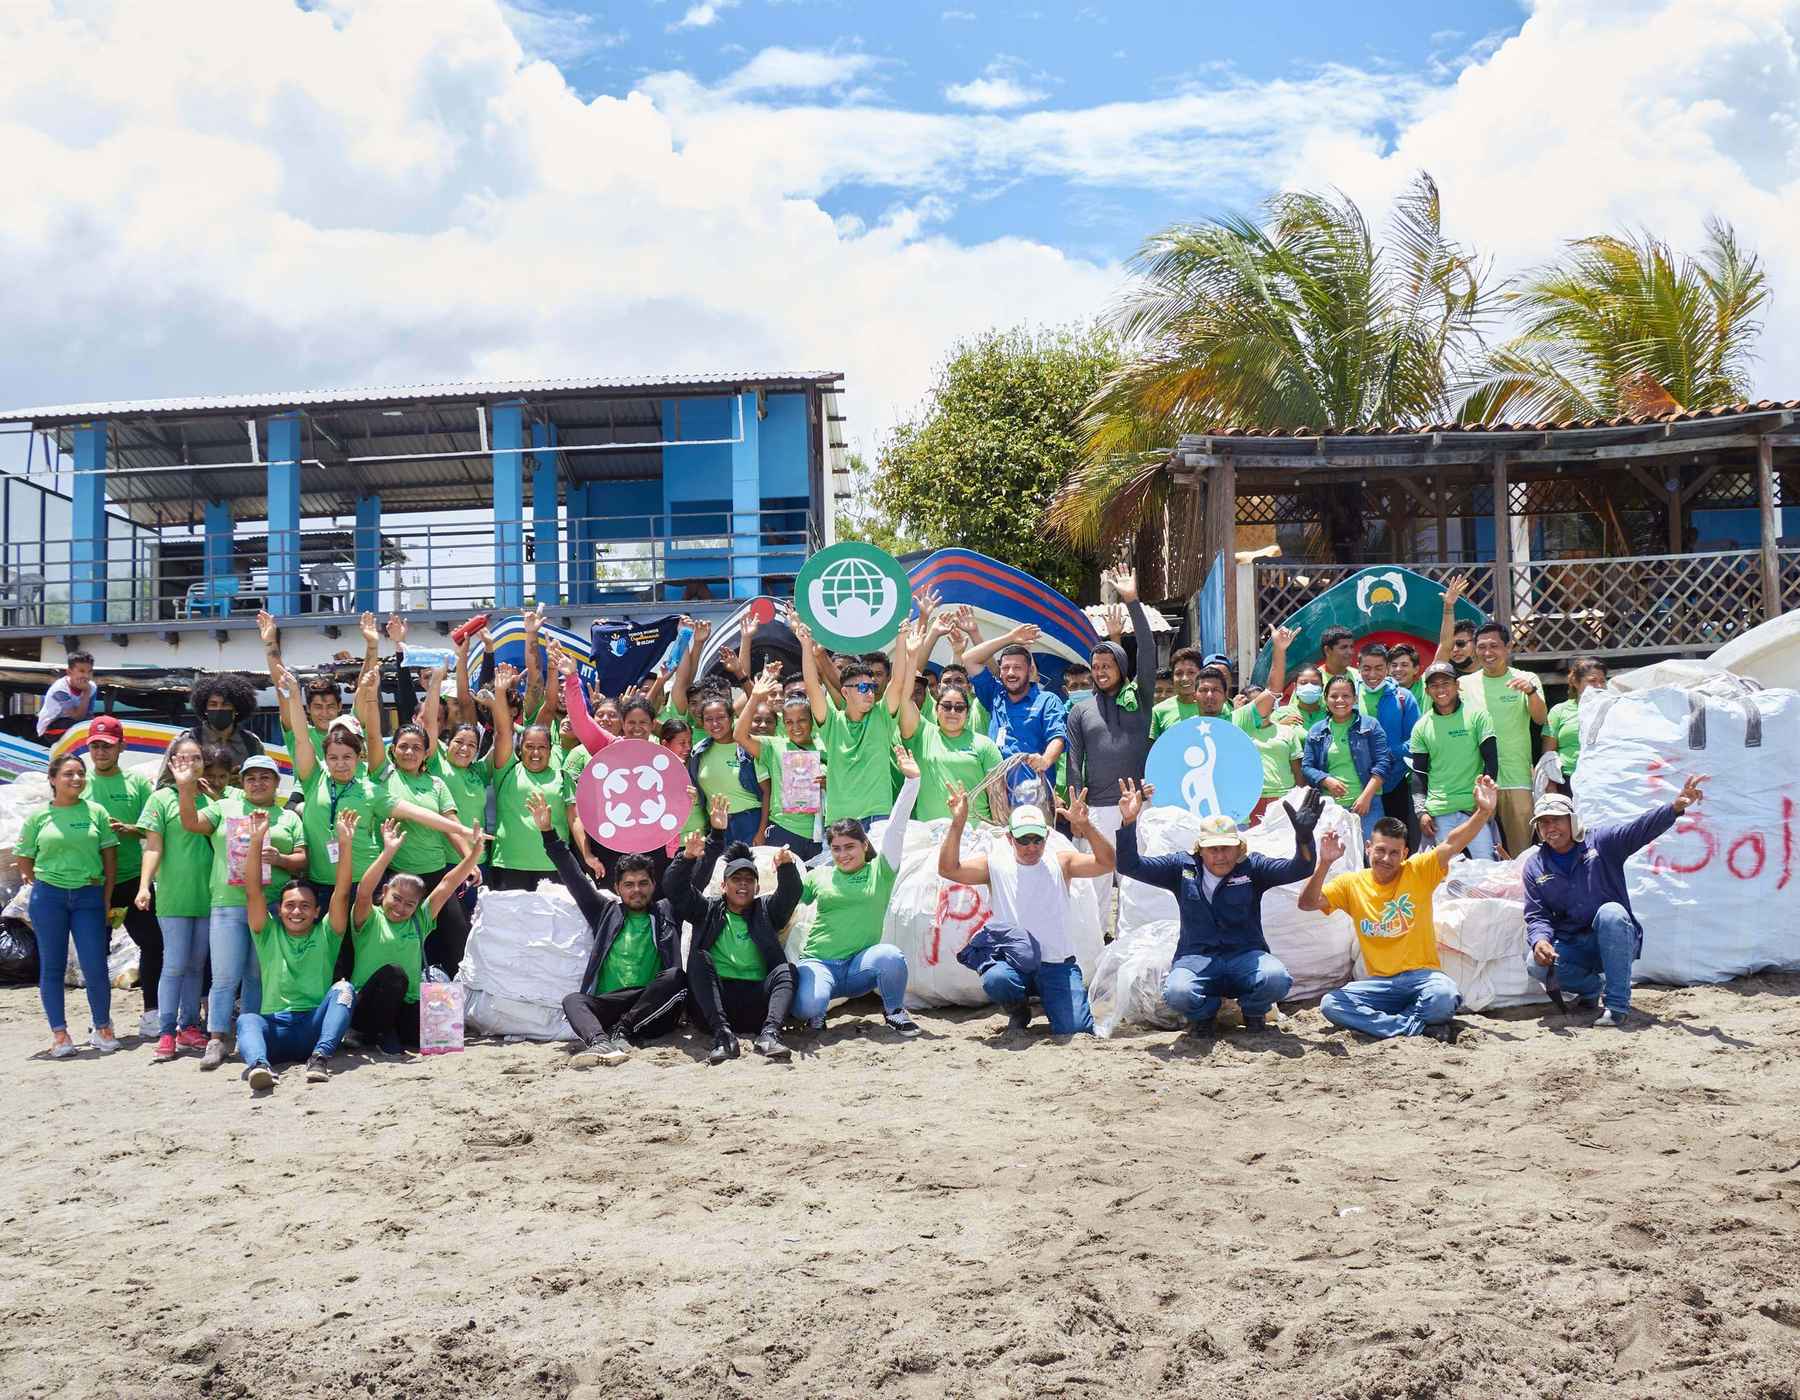 Employees from Nicaragua are standing on the beach and smiling after cleaning up.